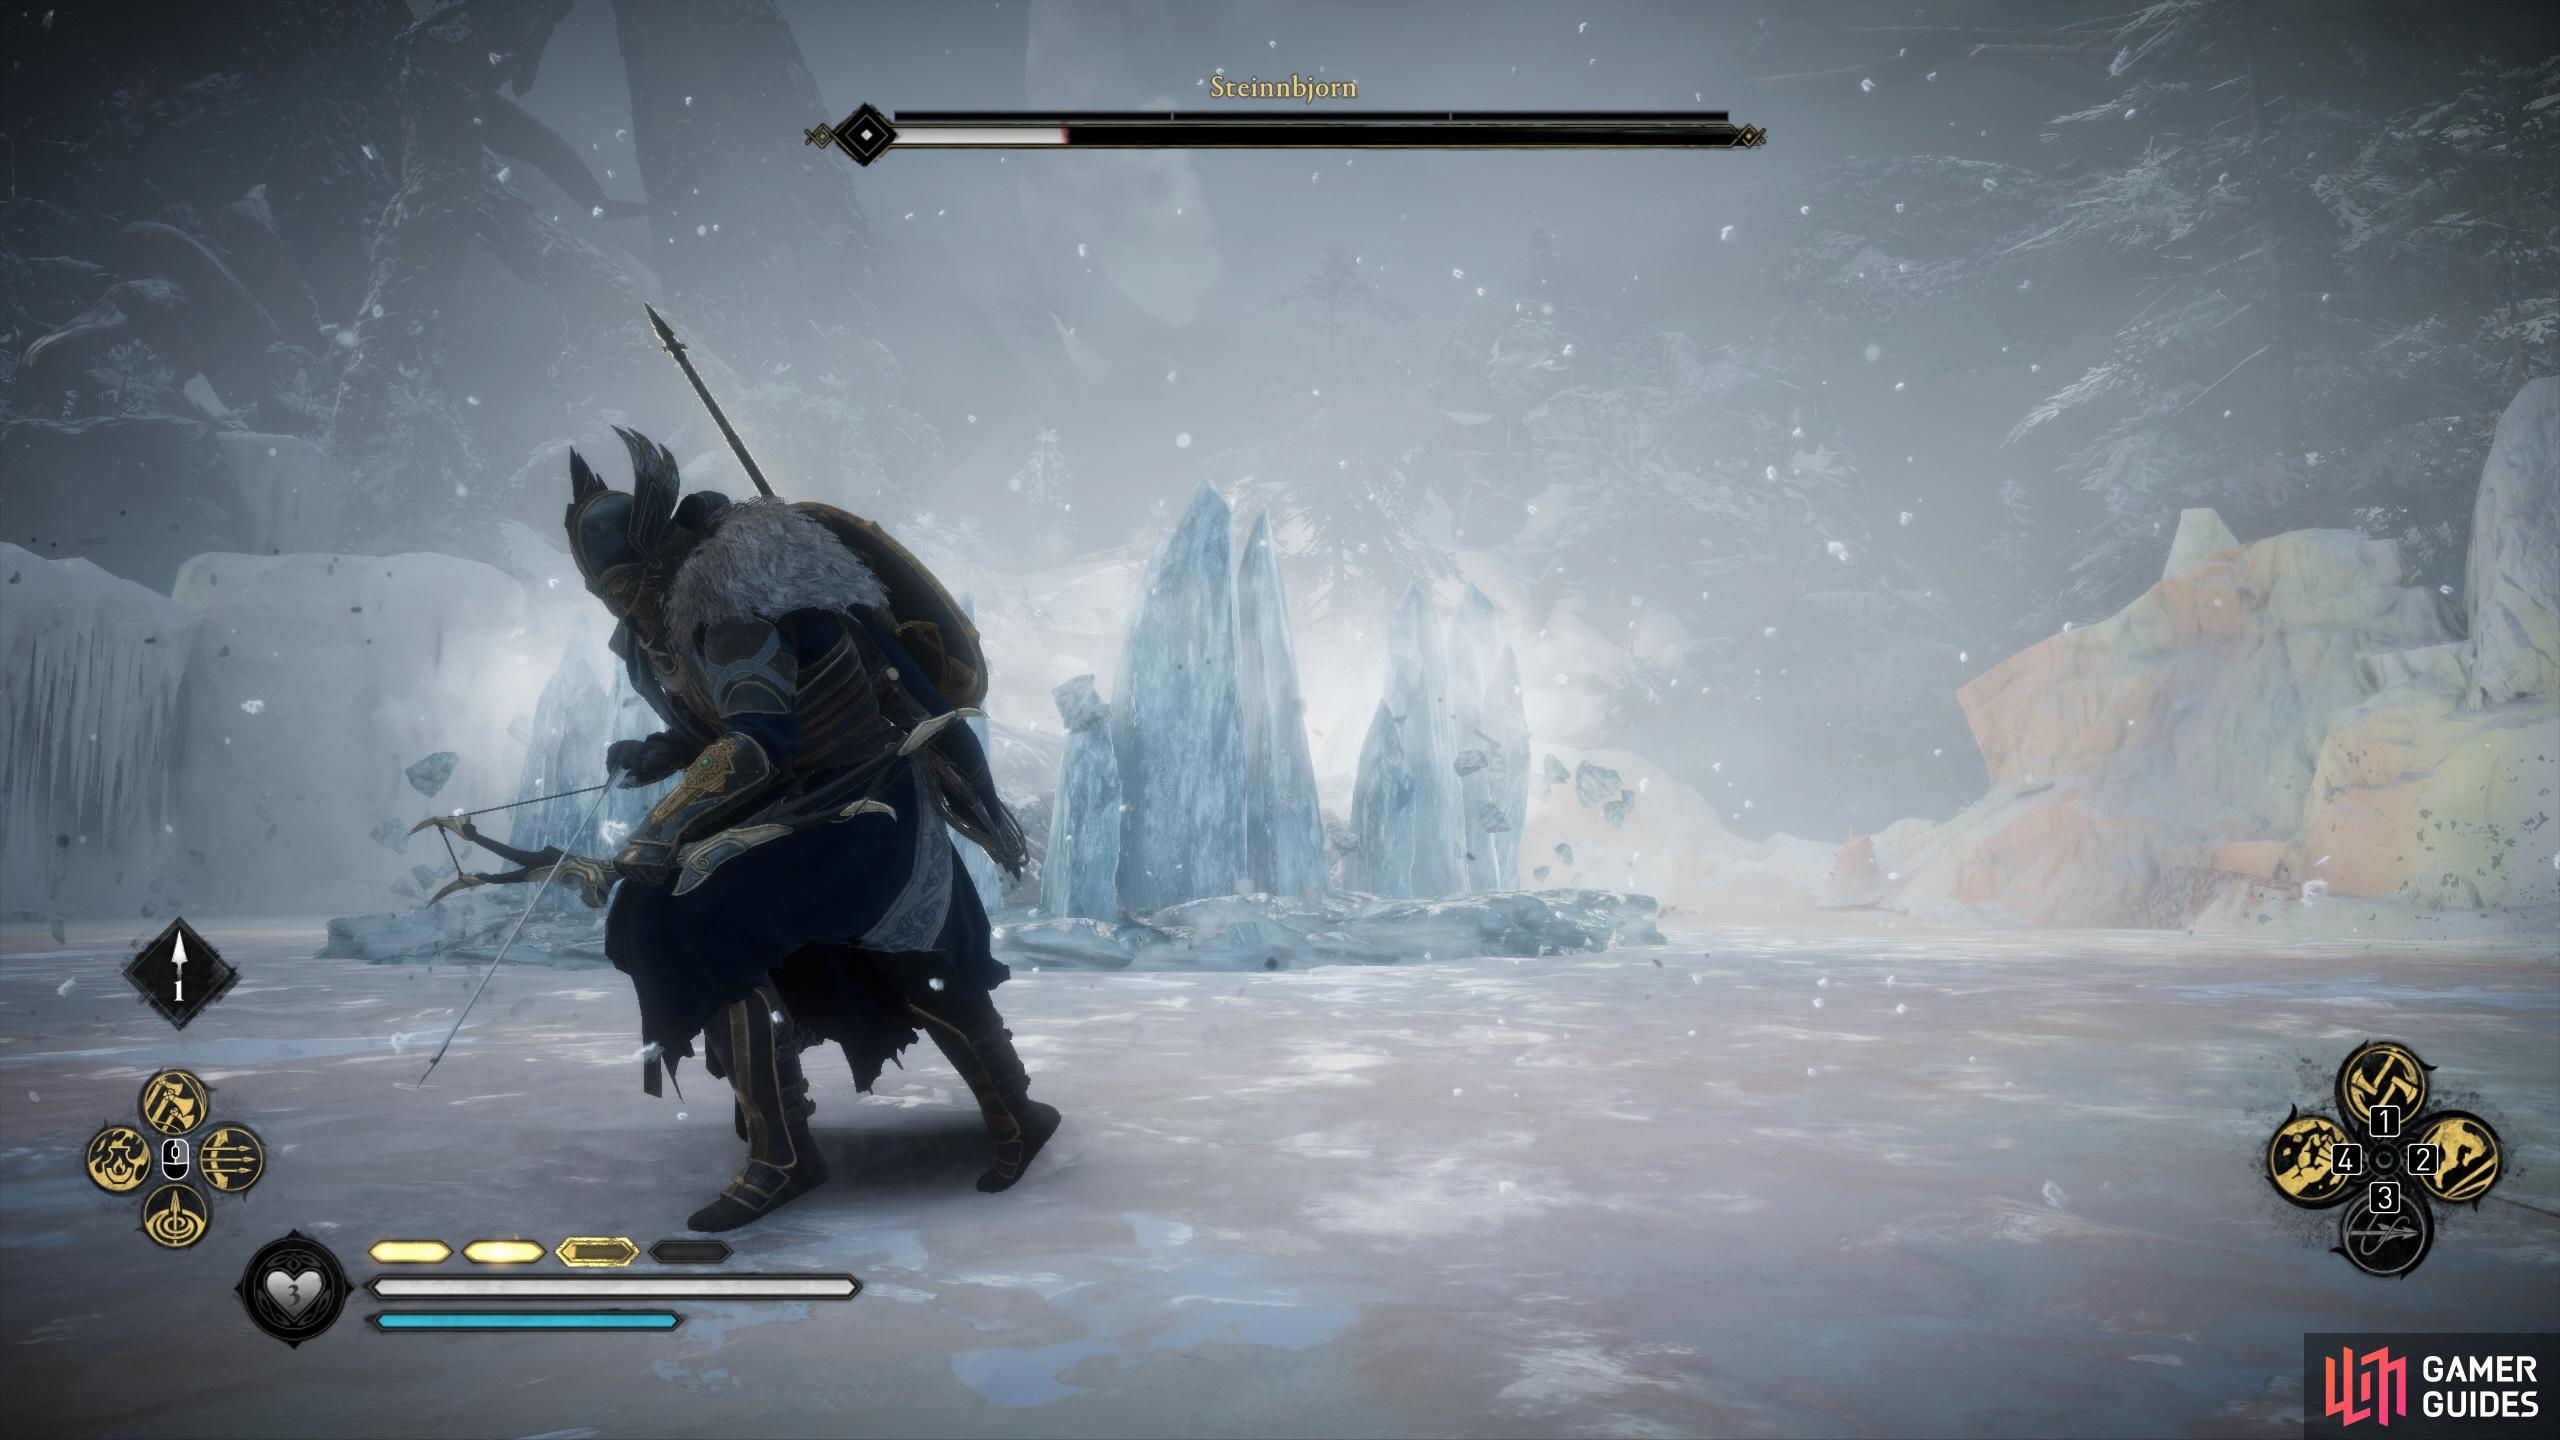 Run away from Steinnbjorn as soon as you see the ice wall to avoid further hits.